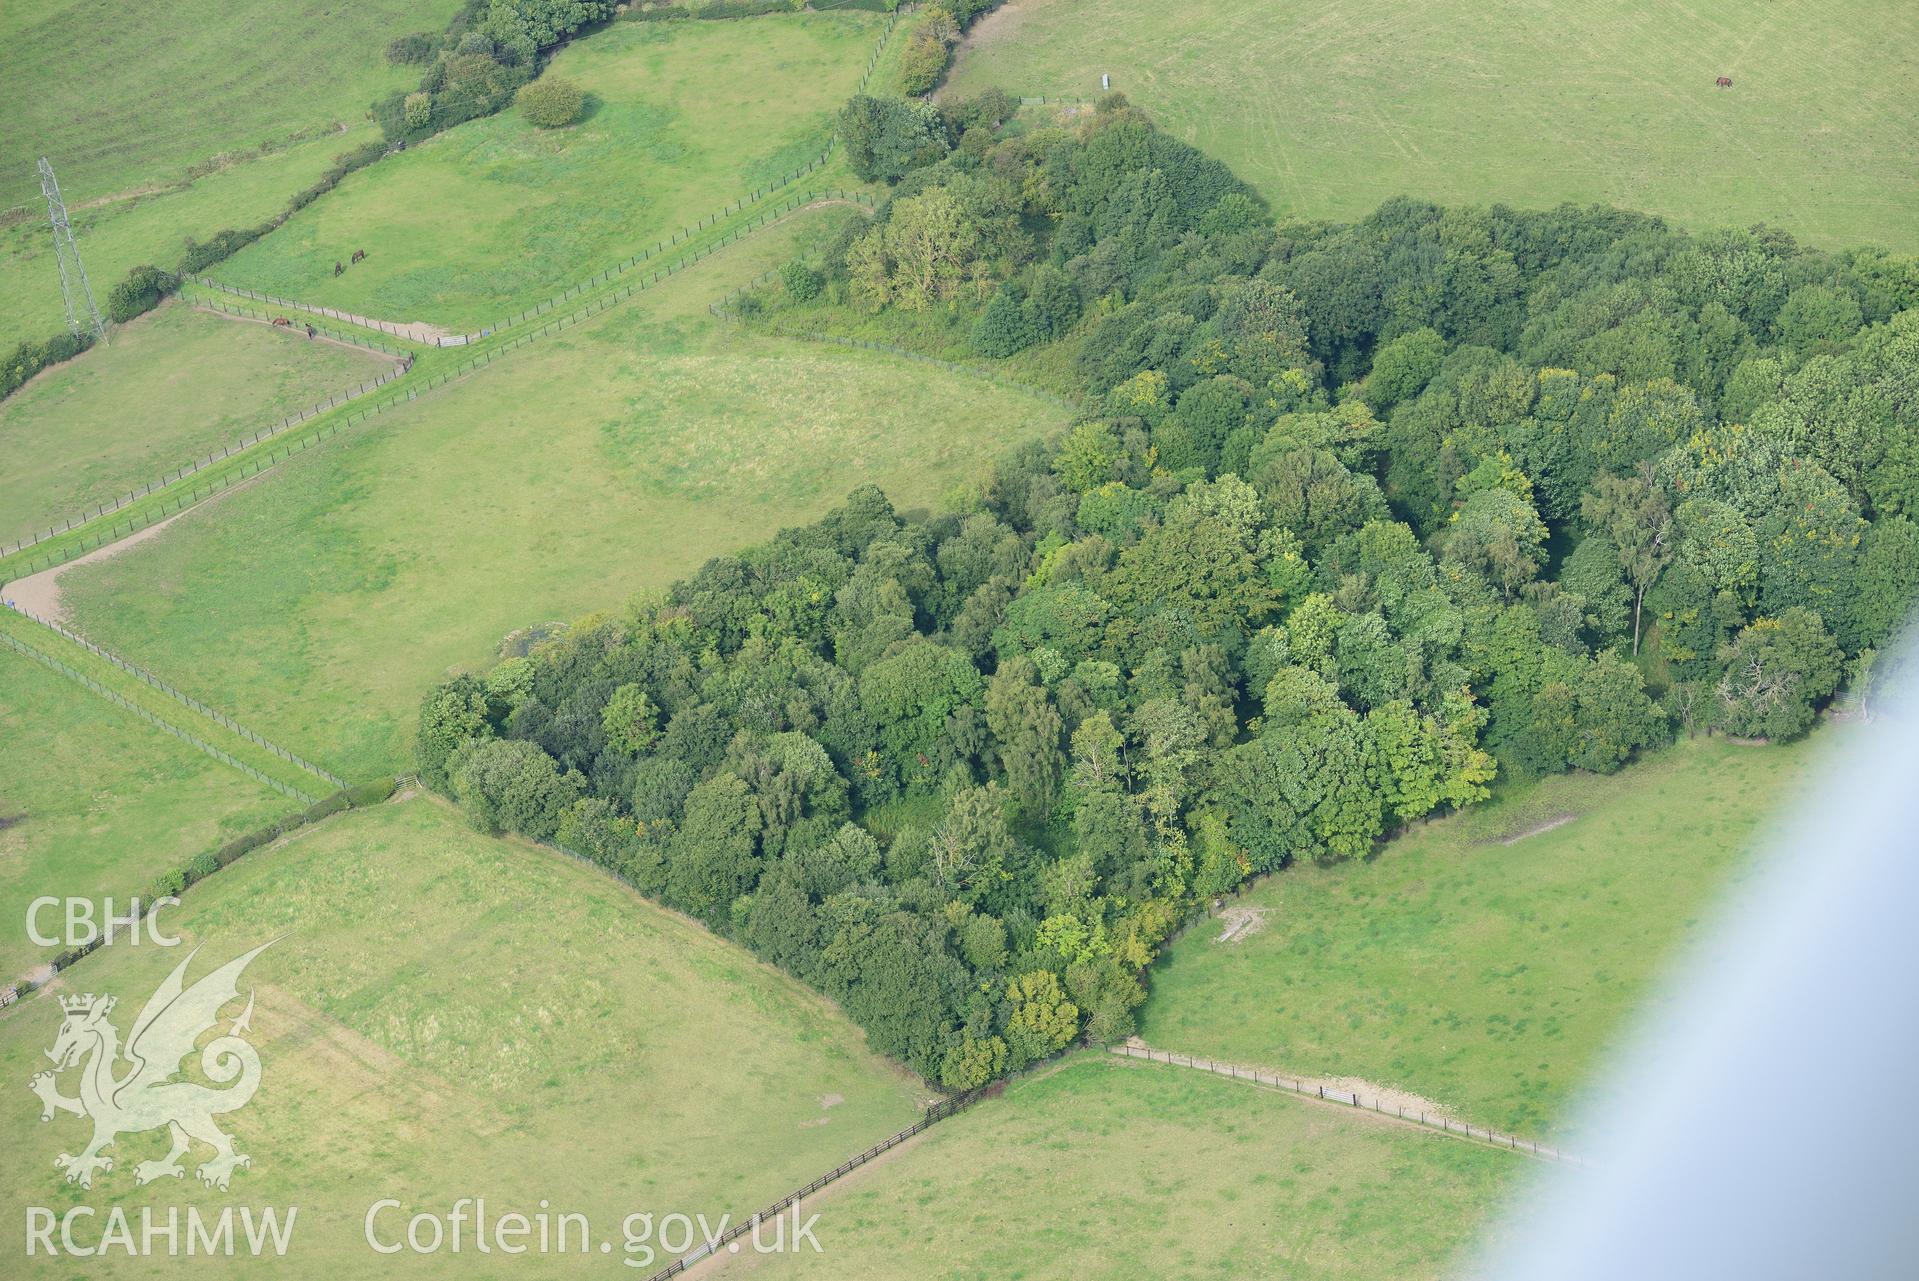 Hafod Wood moated site, Halkyn, near Holywell. Oblique aerial photograph taken during the Royal Commission's programme of archaeological aerial reconnaissance by Toby Driver on 11th September 2015.